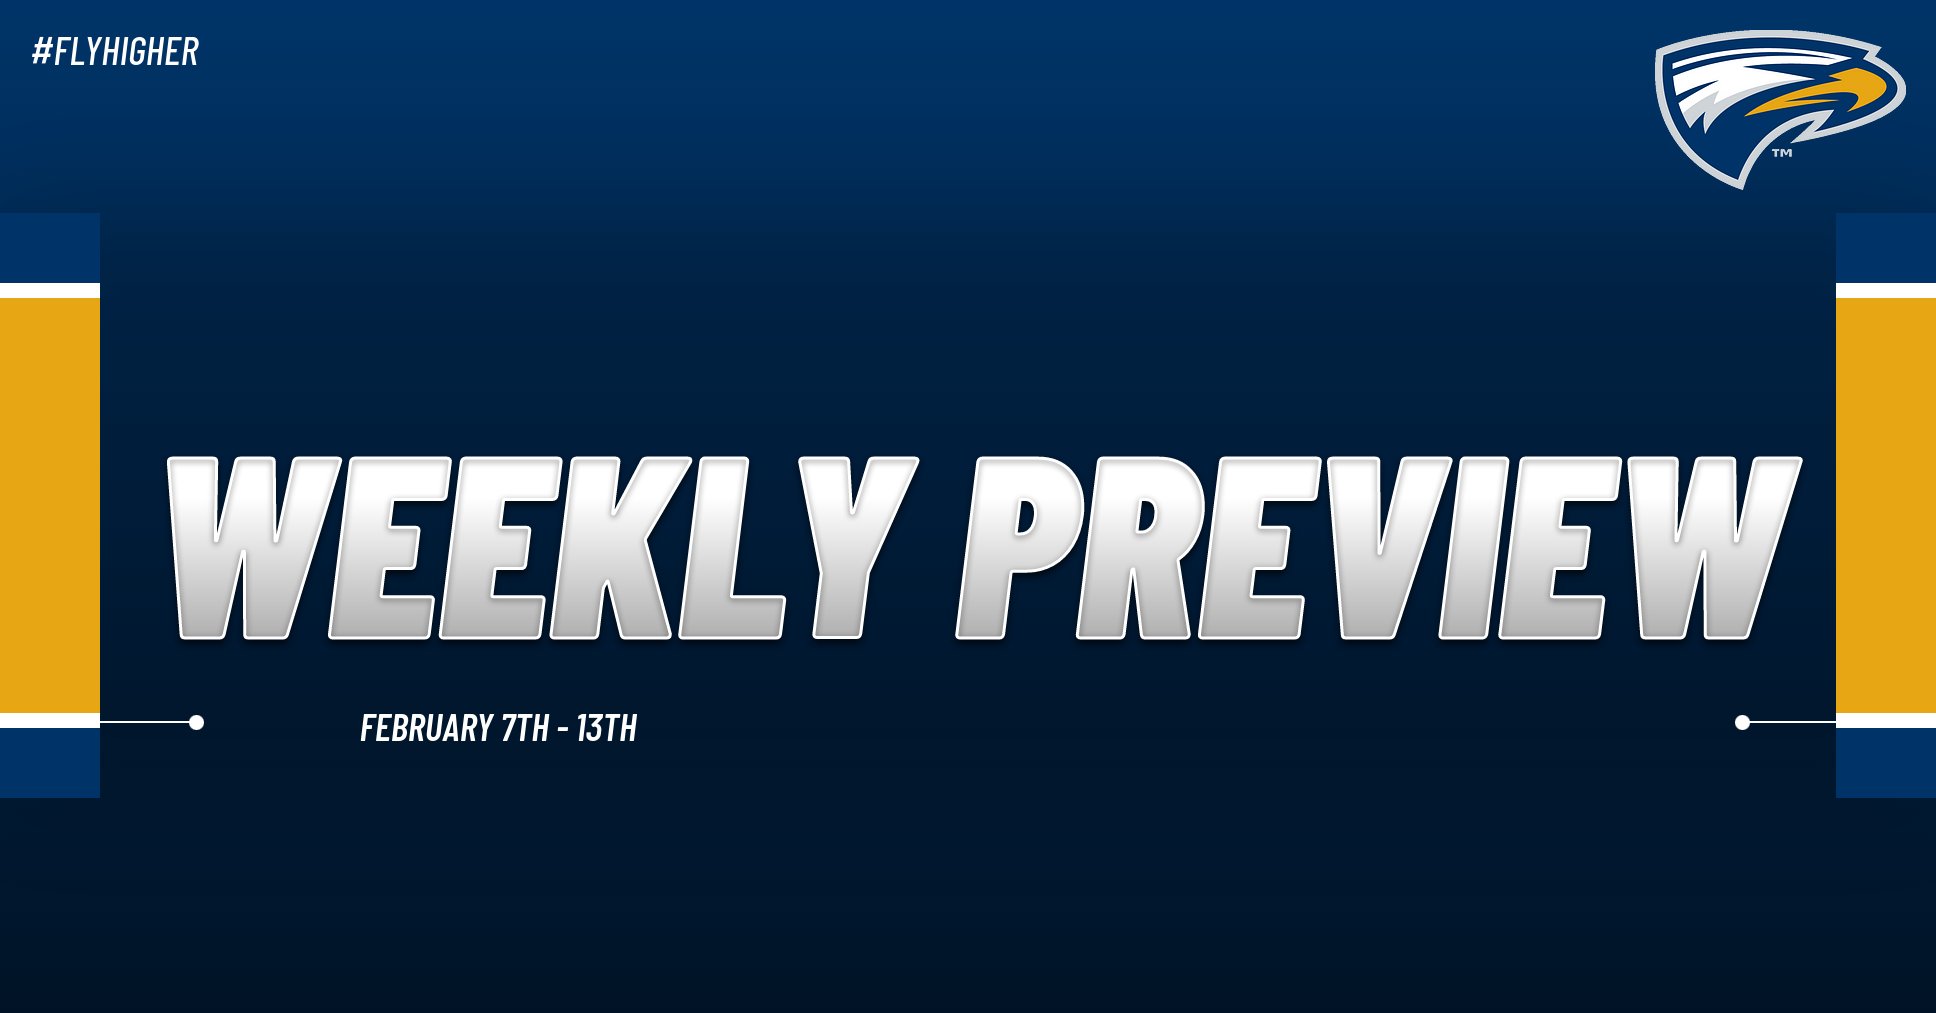 Emory Athletics Weekly Preview - February 7th - 13th